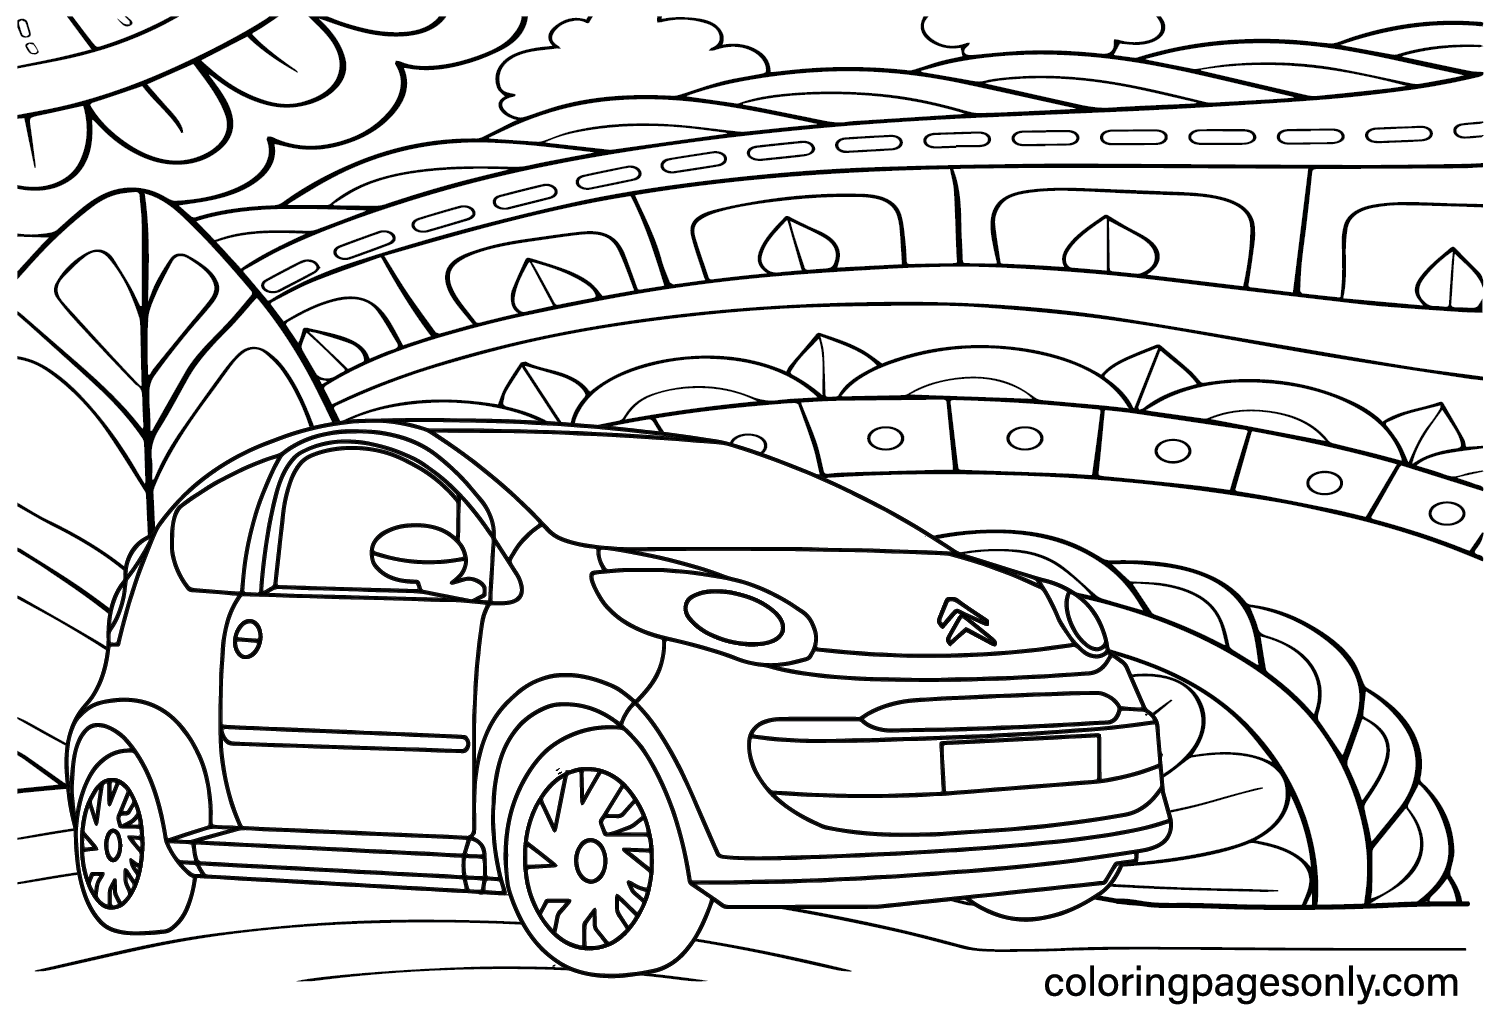 Citroen C1 Coloring Page from Citroën